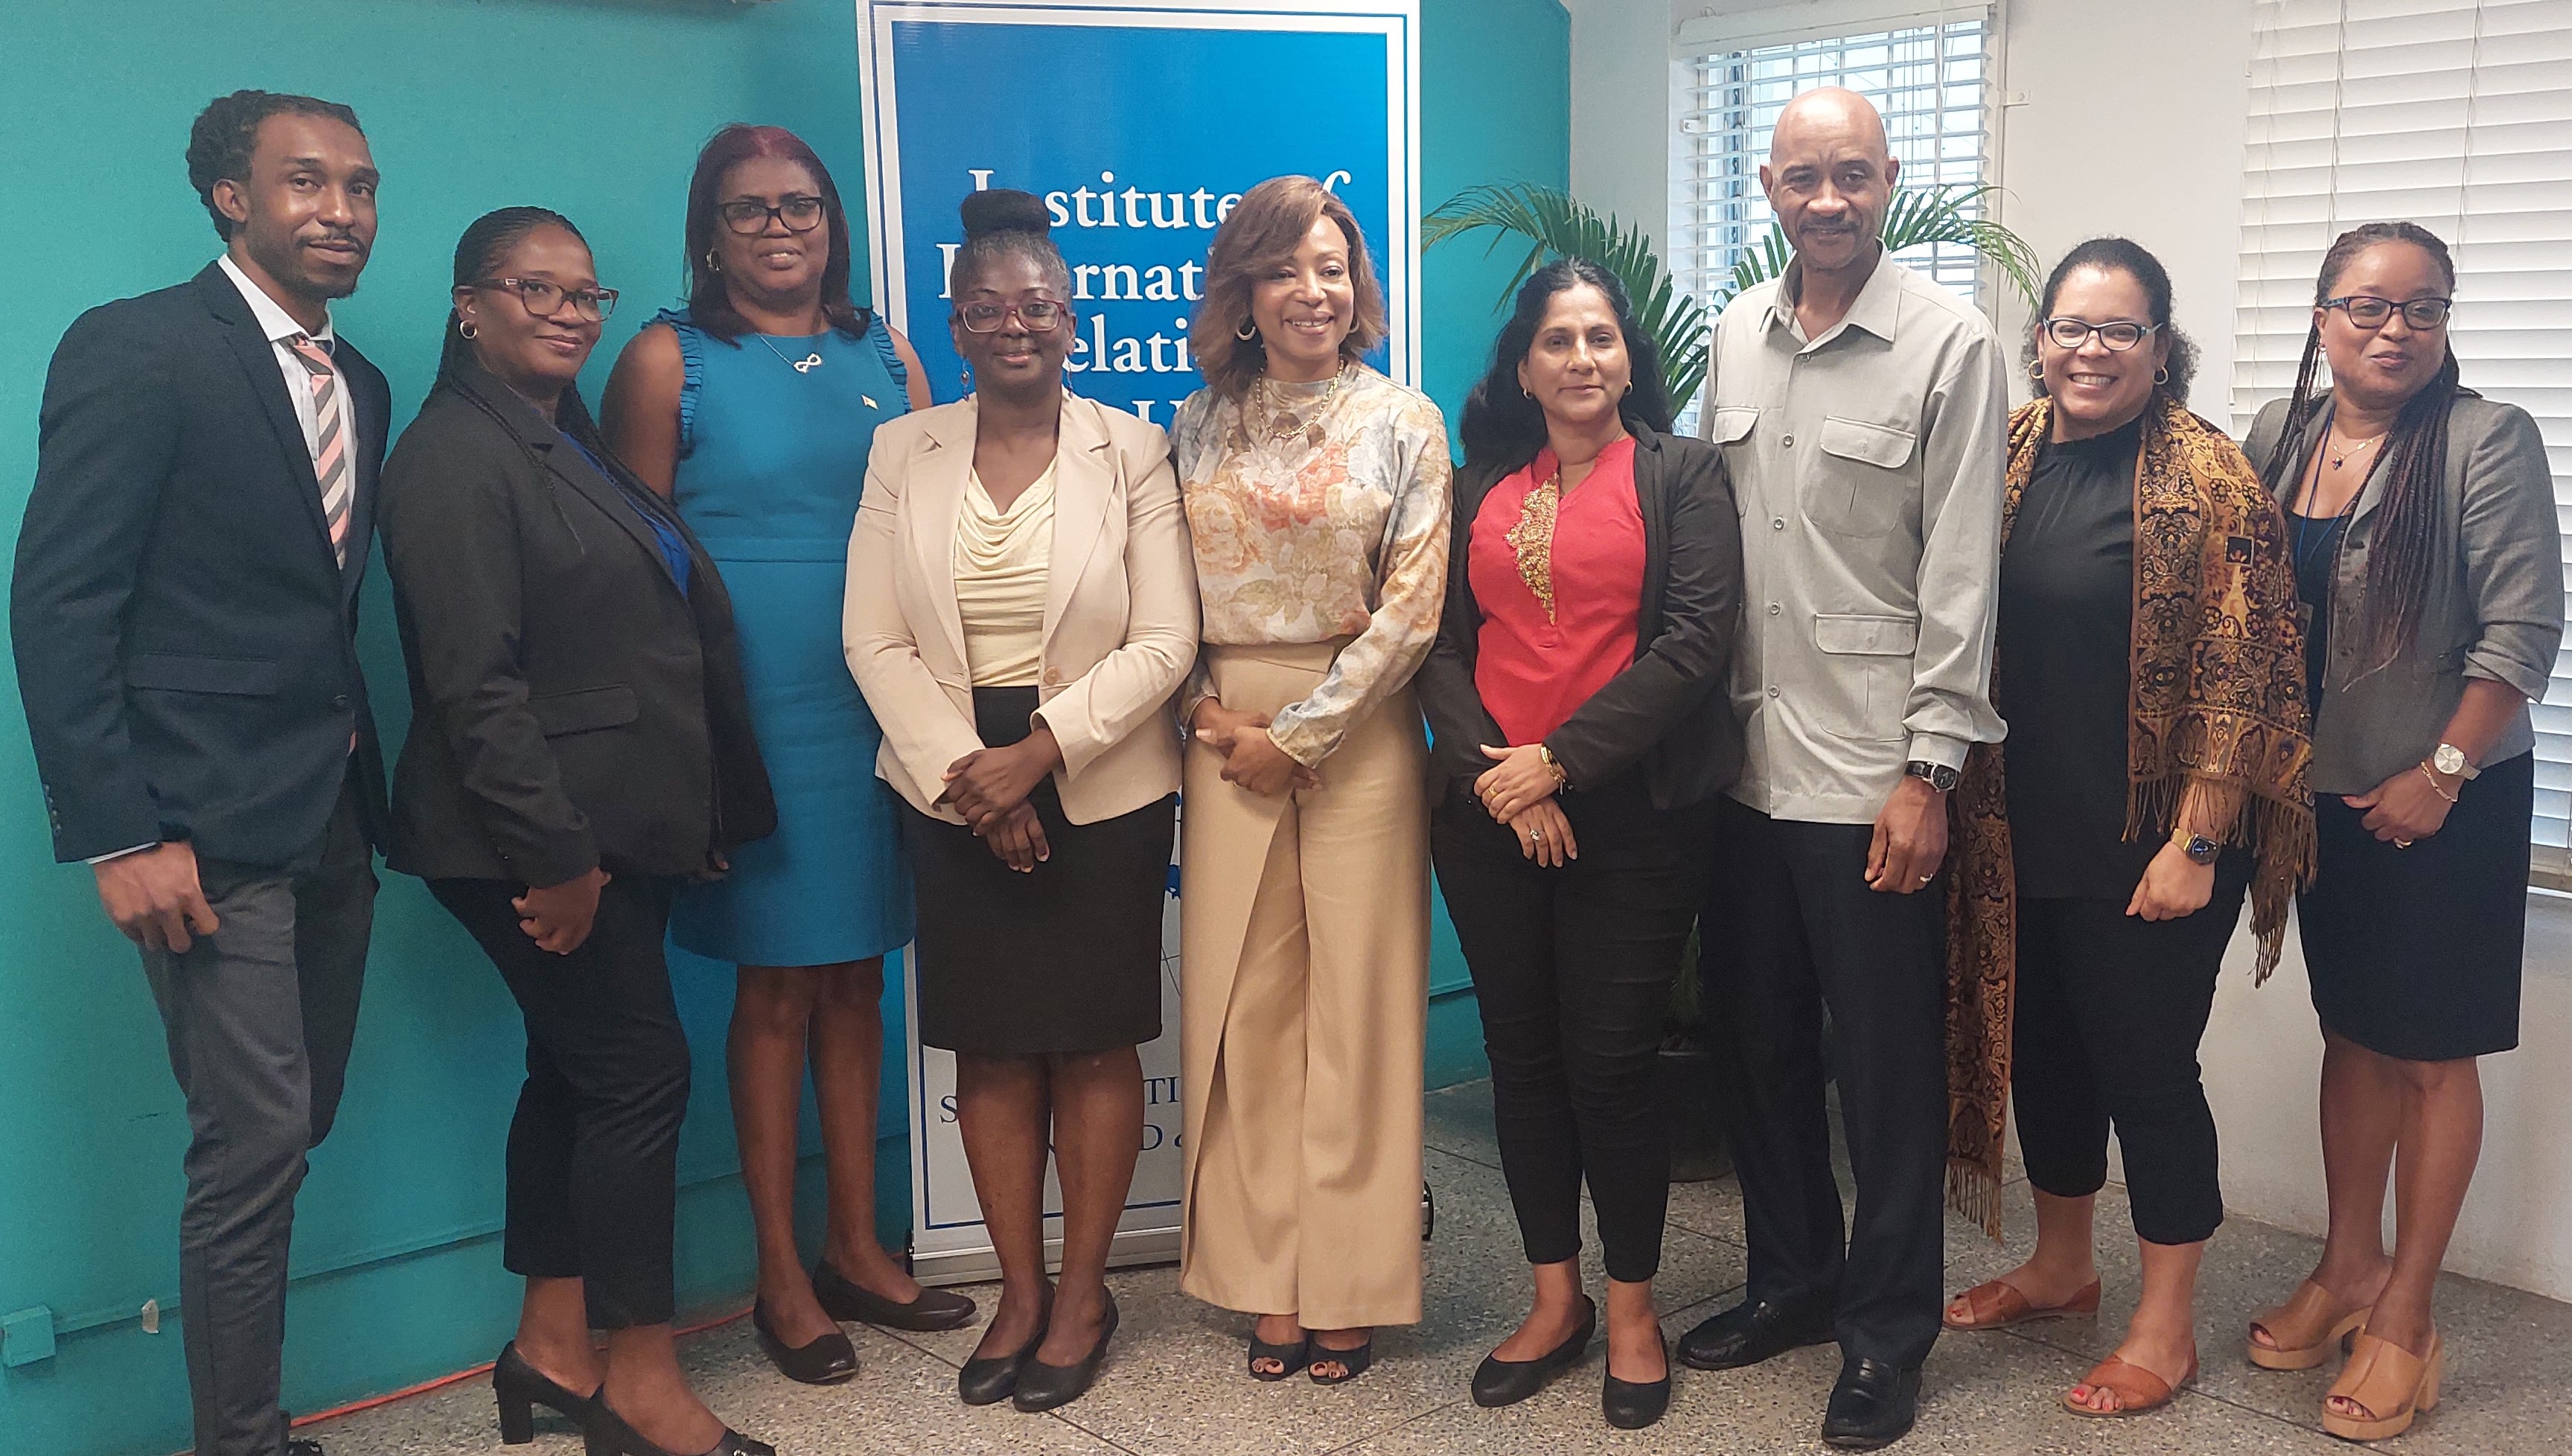 Trinidad and Tobago hosted the Caribbean Single Market and Economy (CSME) Focal Point Exchange Programme 